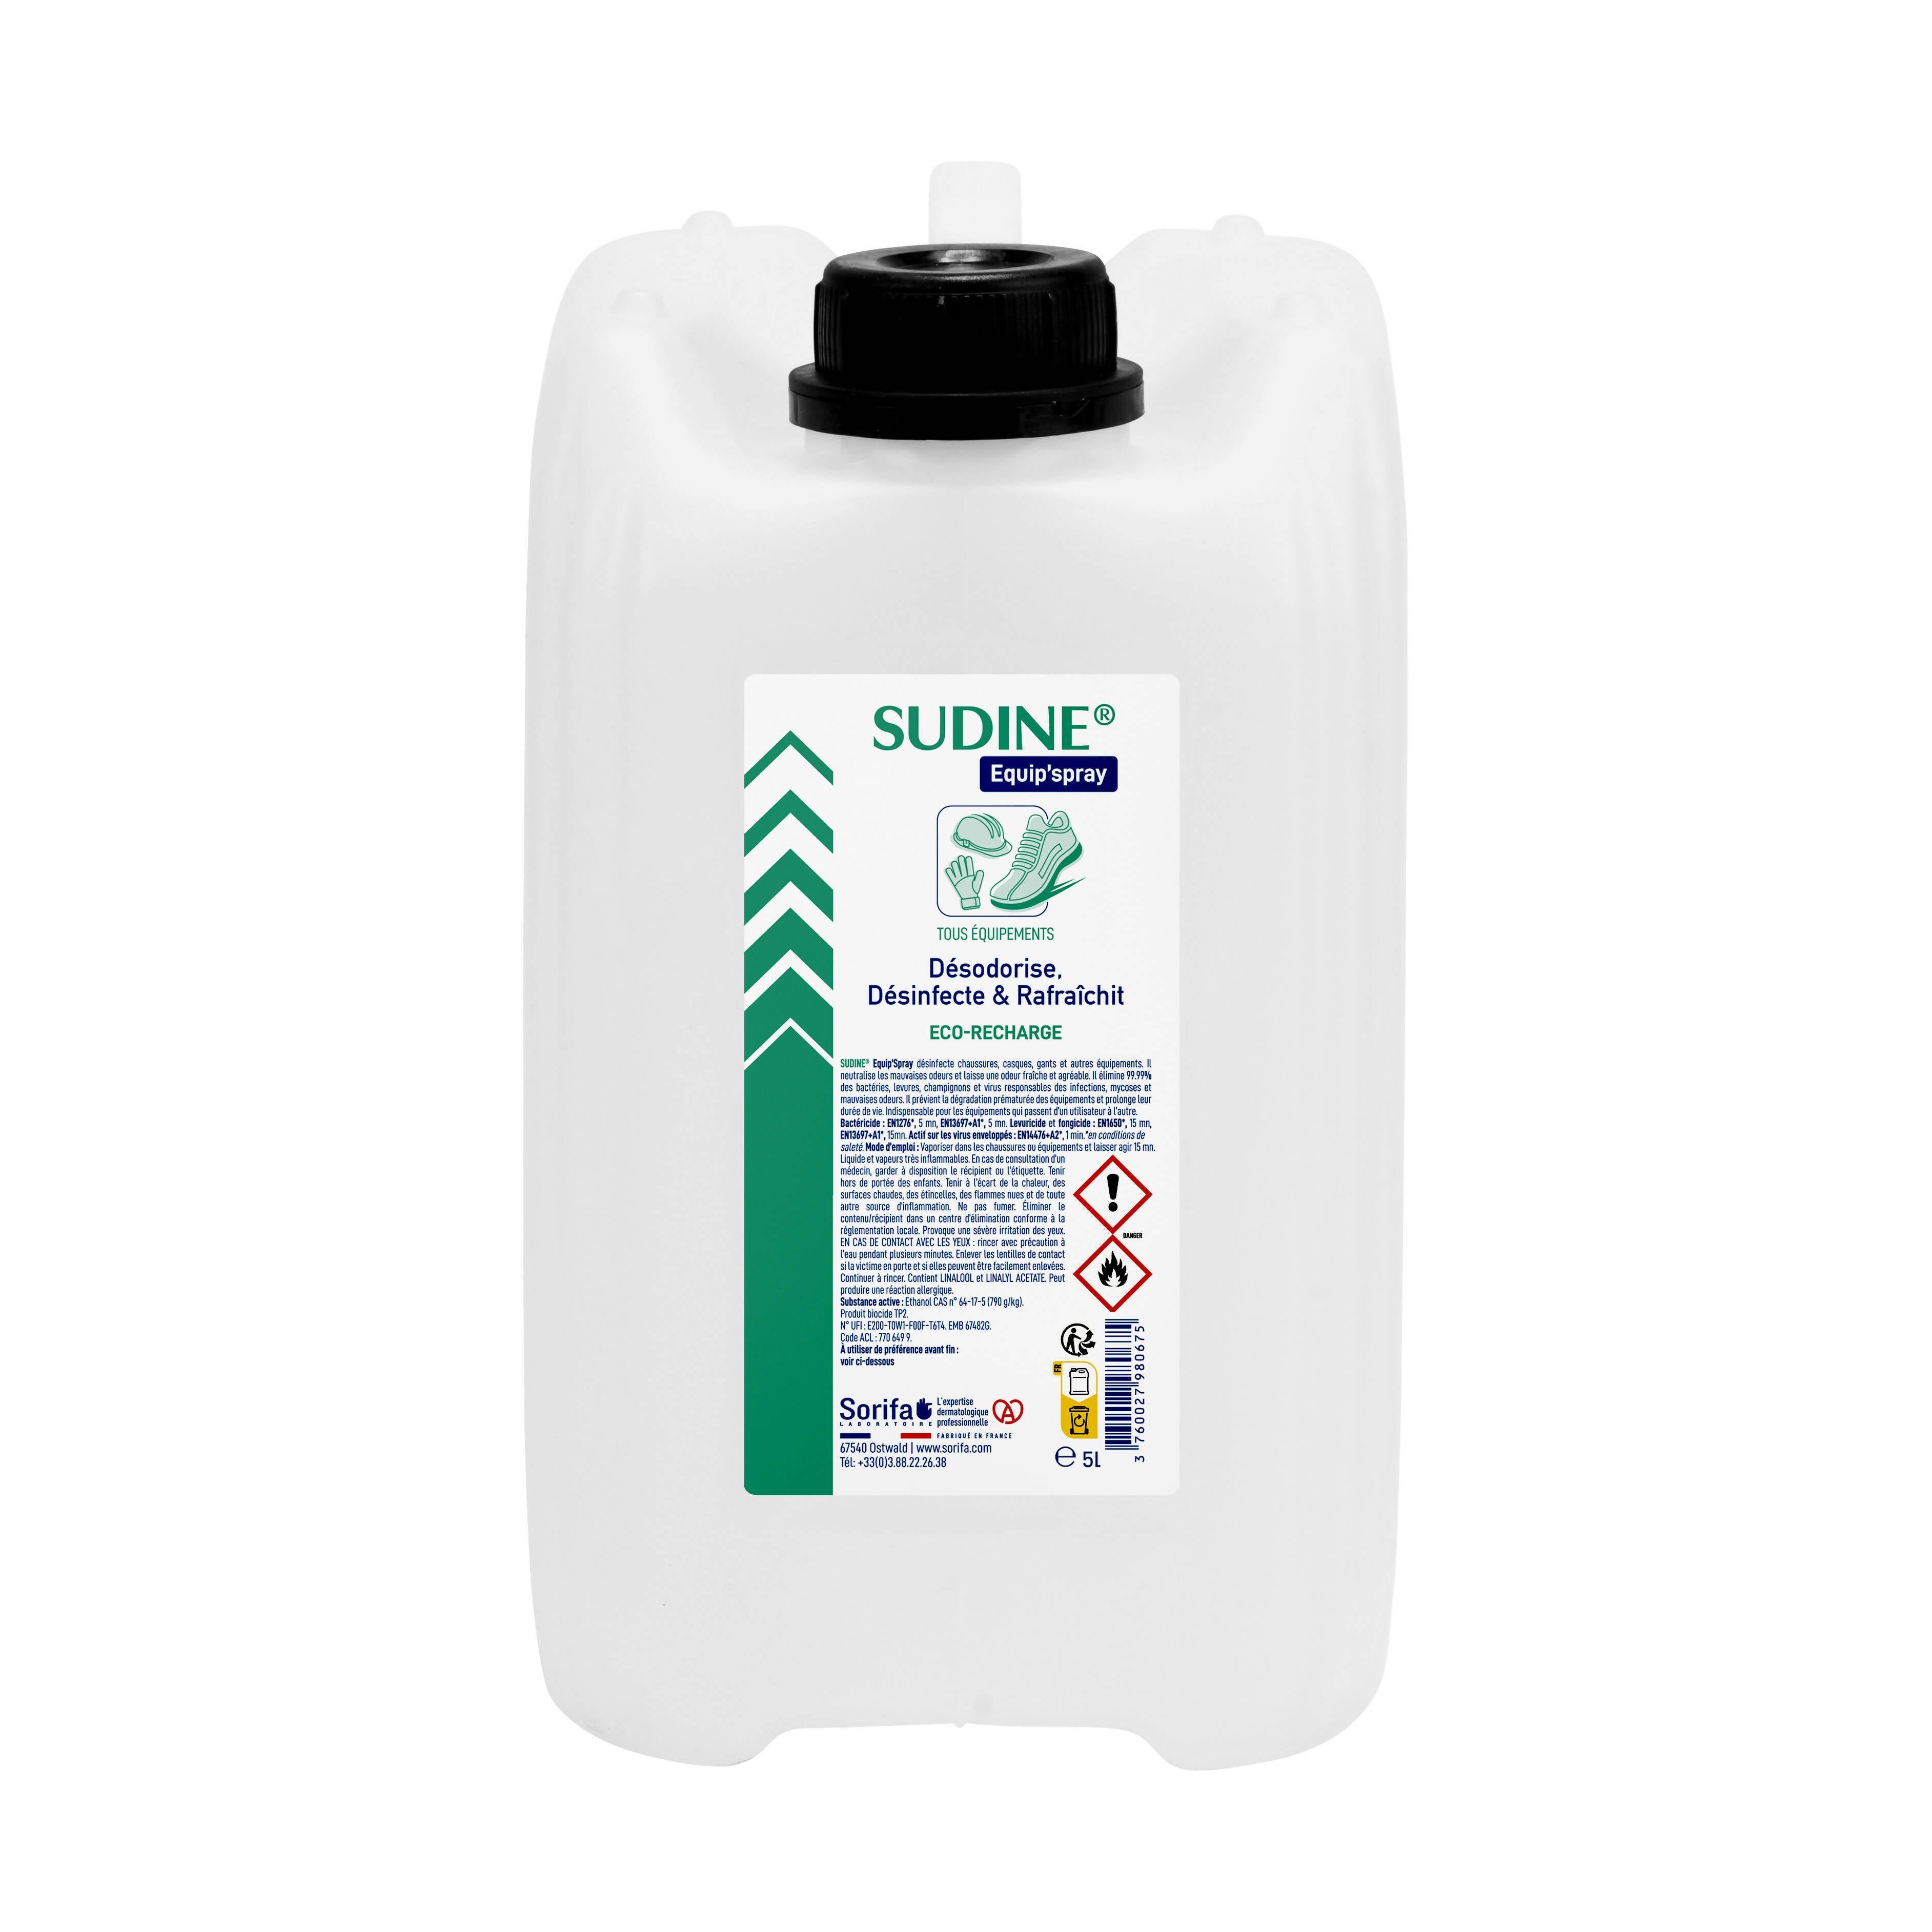 SORIFA - Complete box of 4 - Sudine Equip'spray - Deodorizes, disinfects, refreshes - Shoes, helmets, gloves, equipment - 5L refill for SUDINE Equip'spray 50 and 125 ml or for the 1L SORIFA Spray